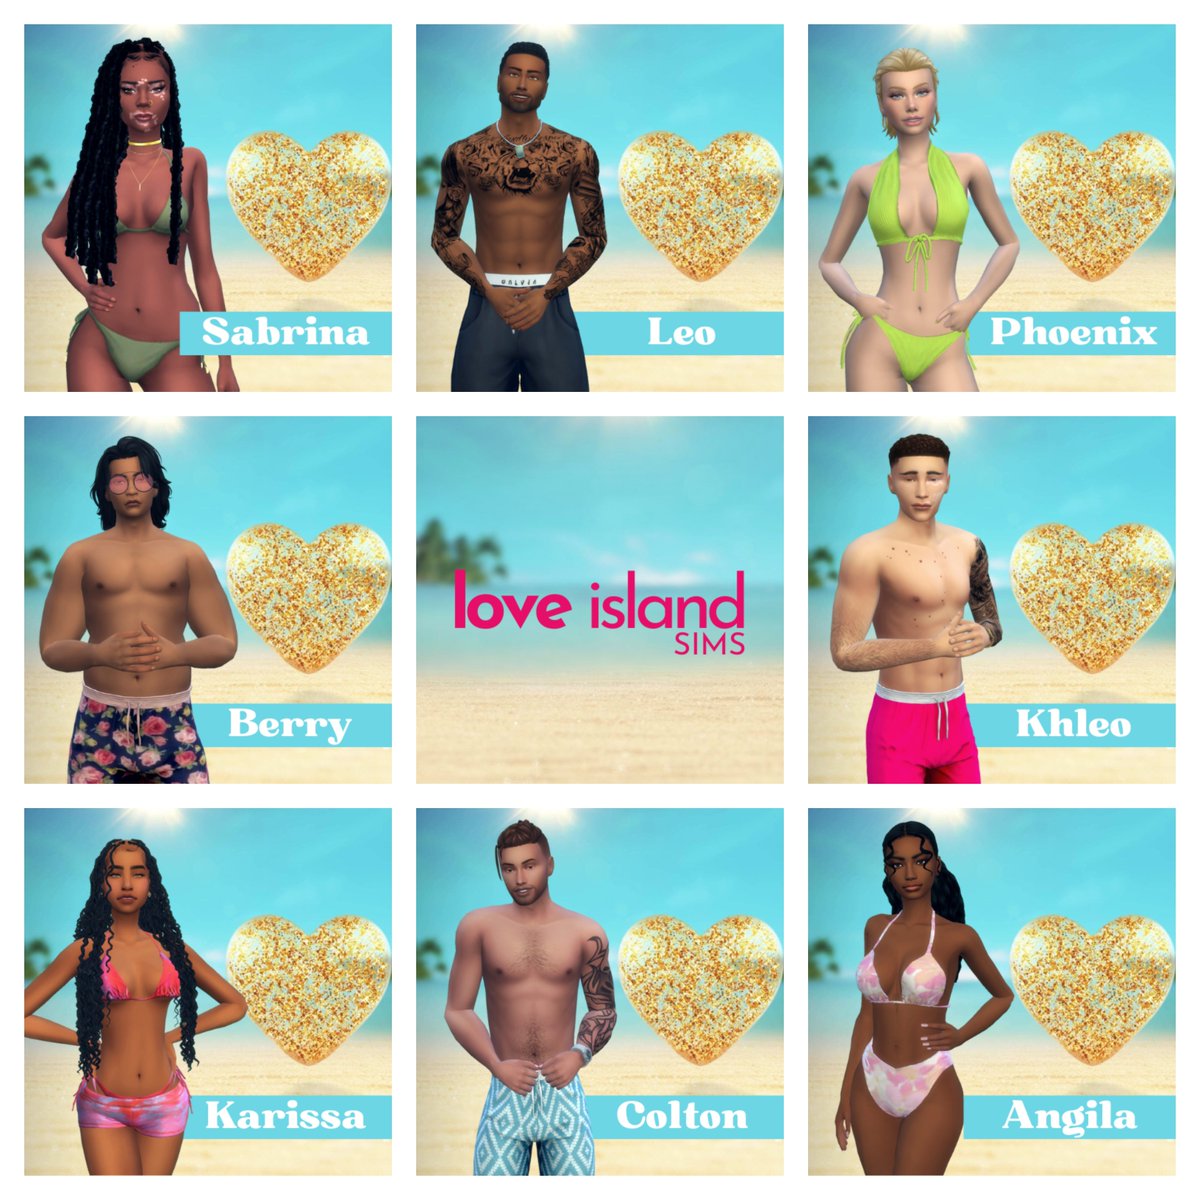 My Love Island Sims challenge is commencing TONIGHT on stream at 9pm EST and here are the first 8 sims to enter the villa! I'm excited to see if any of them will find actual love or they just there for the fame fr 🤣 #LoveIsland #ShowUsYourSims #Sims4Challenge